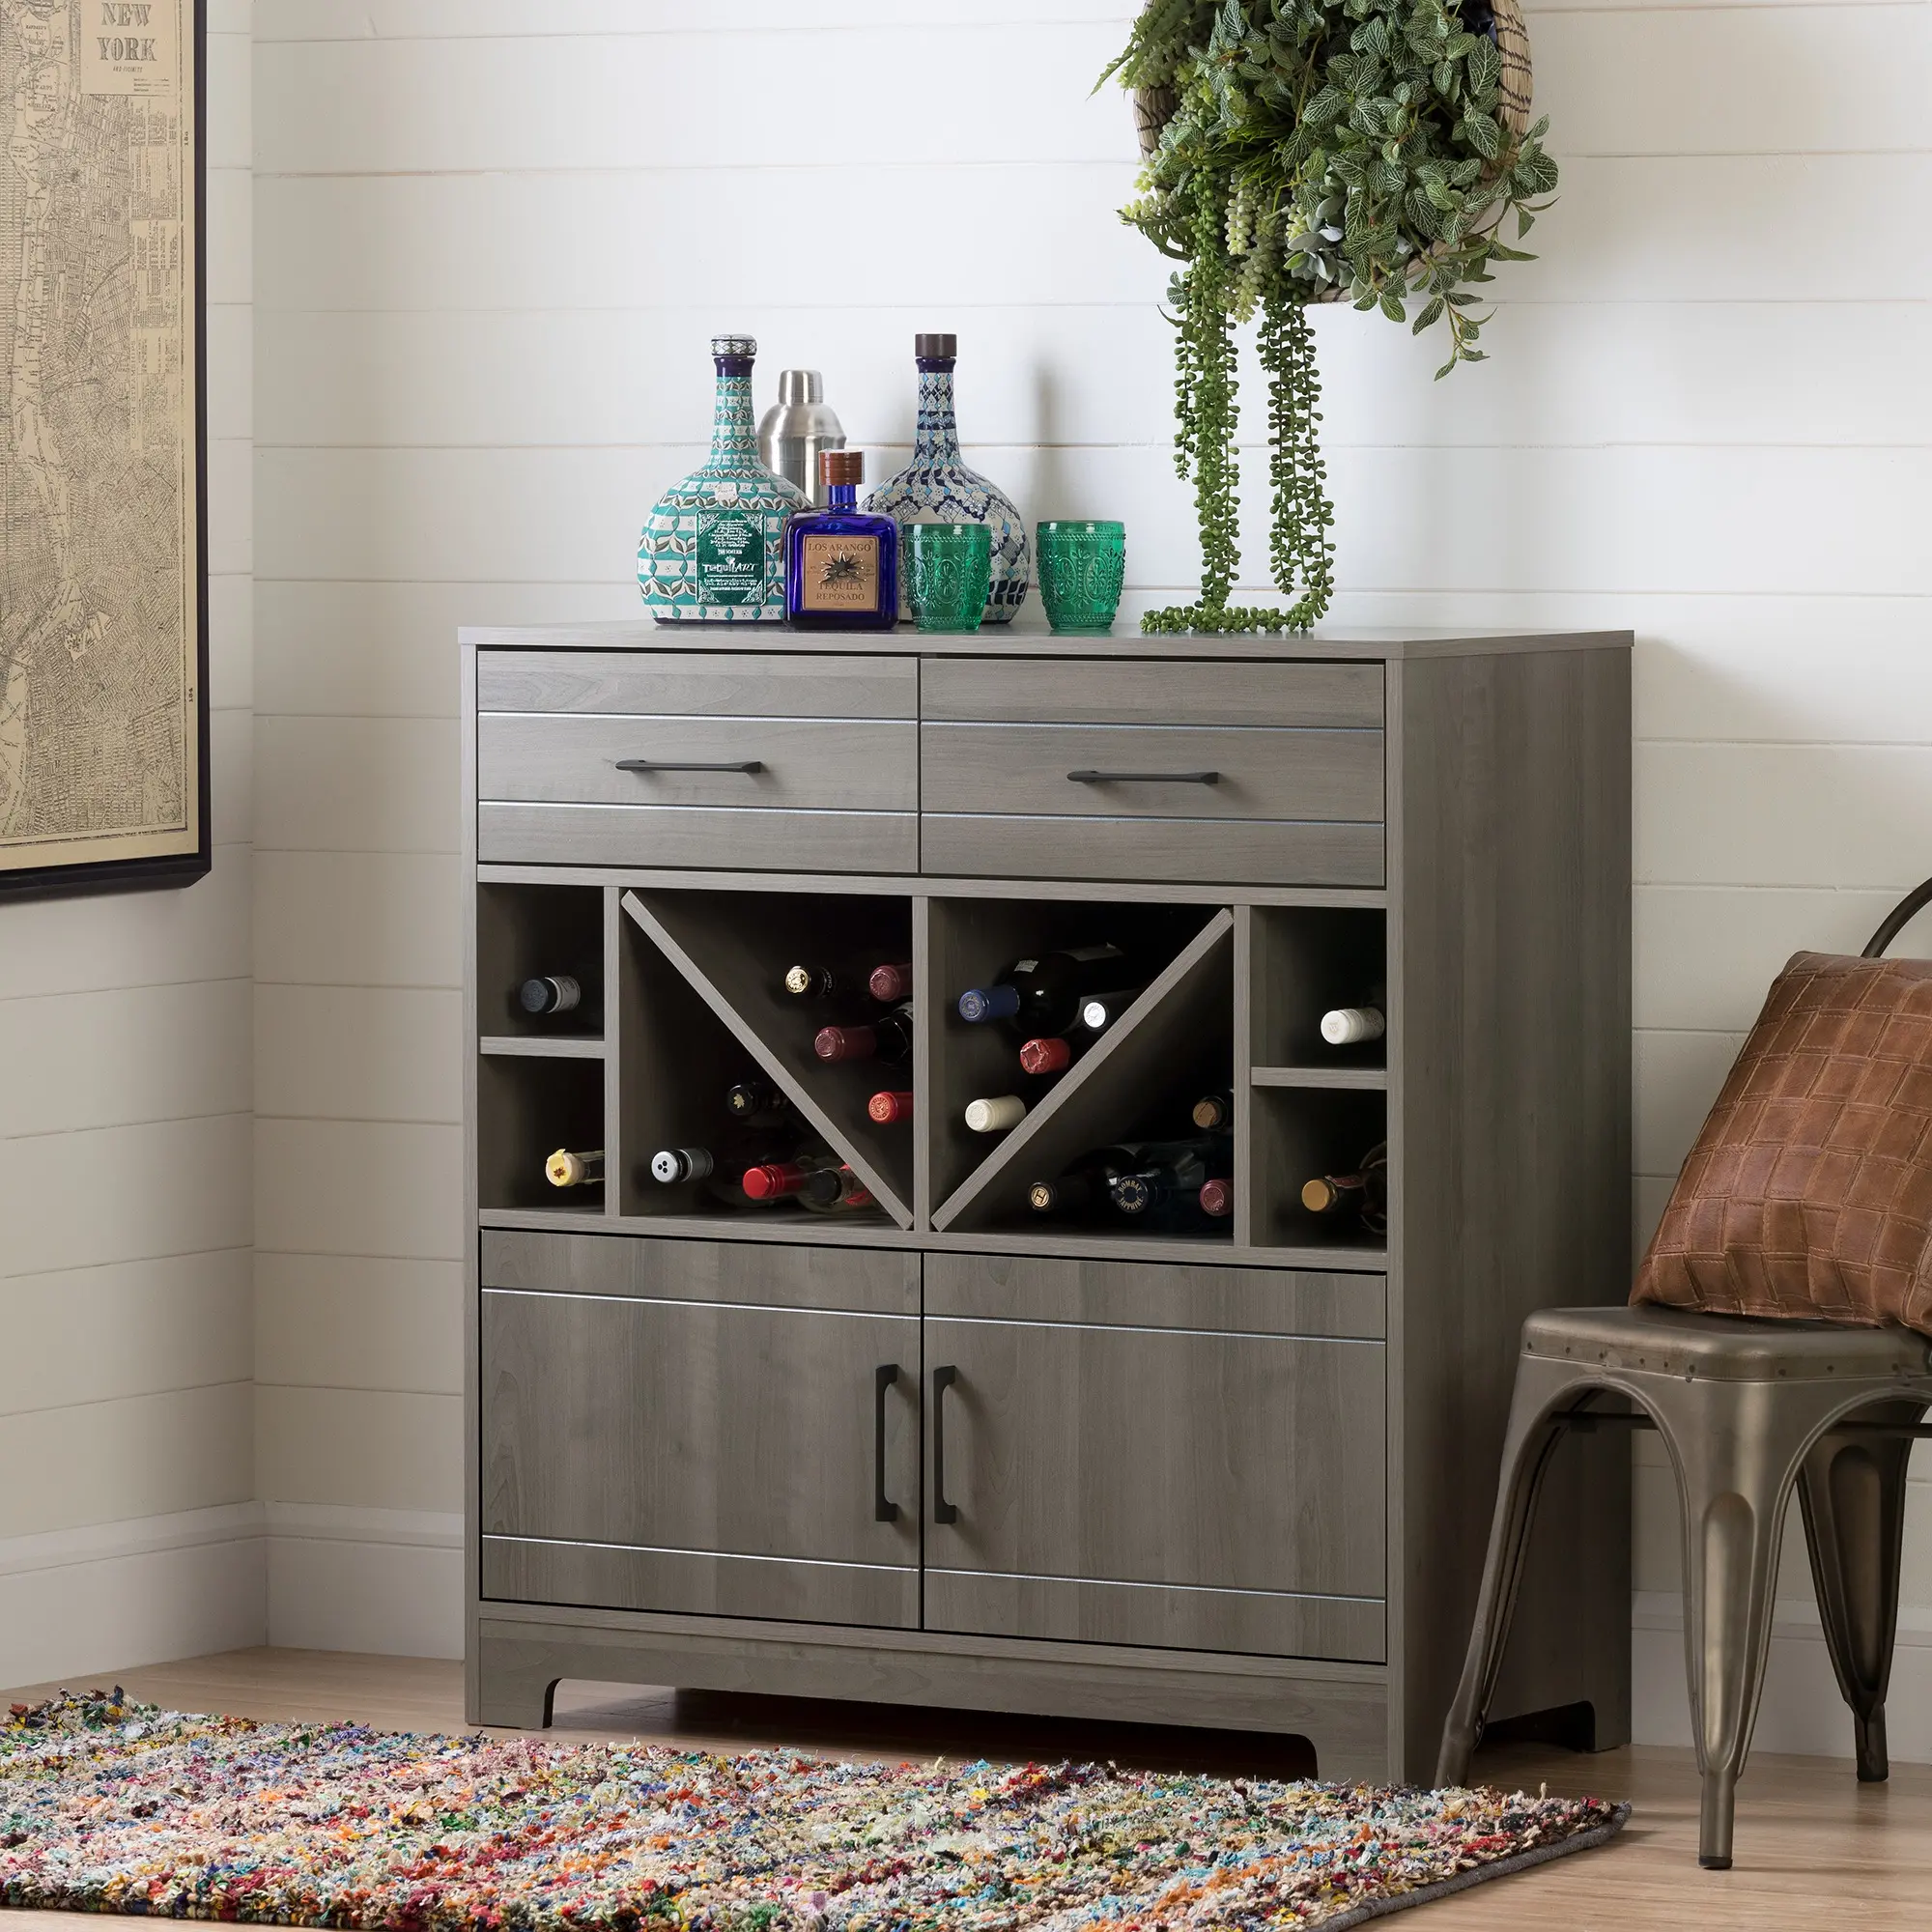 11030 Vietti Bar Cabinet with Bottle Storage and Drawers sku 11030